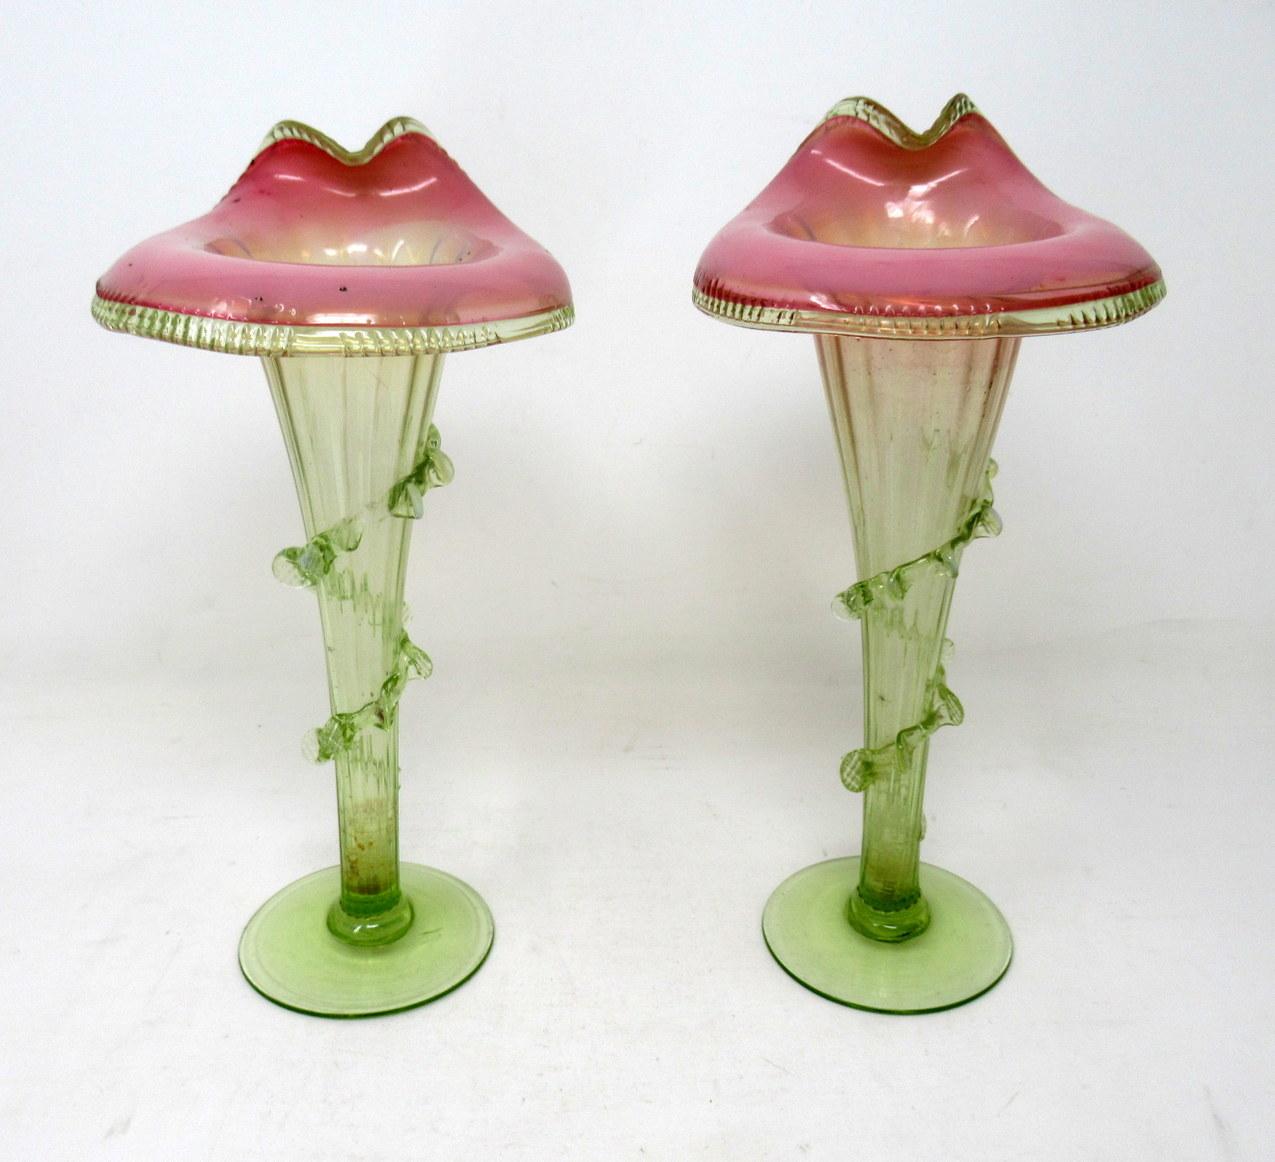 Wonderful identical pair of early victorian english hand blown jack in the pulpit iridescent flower vases firmly attributed to Thomas Webb. Stourbridge, England from 1804 till 1869. 

The tapering ribbed central column with applied trailing